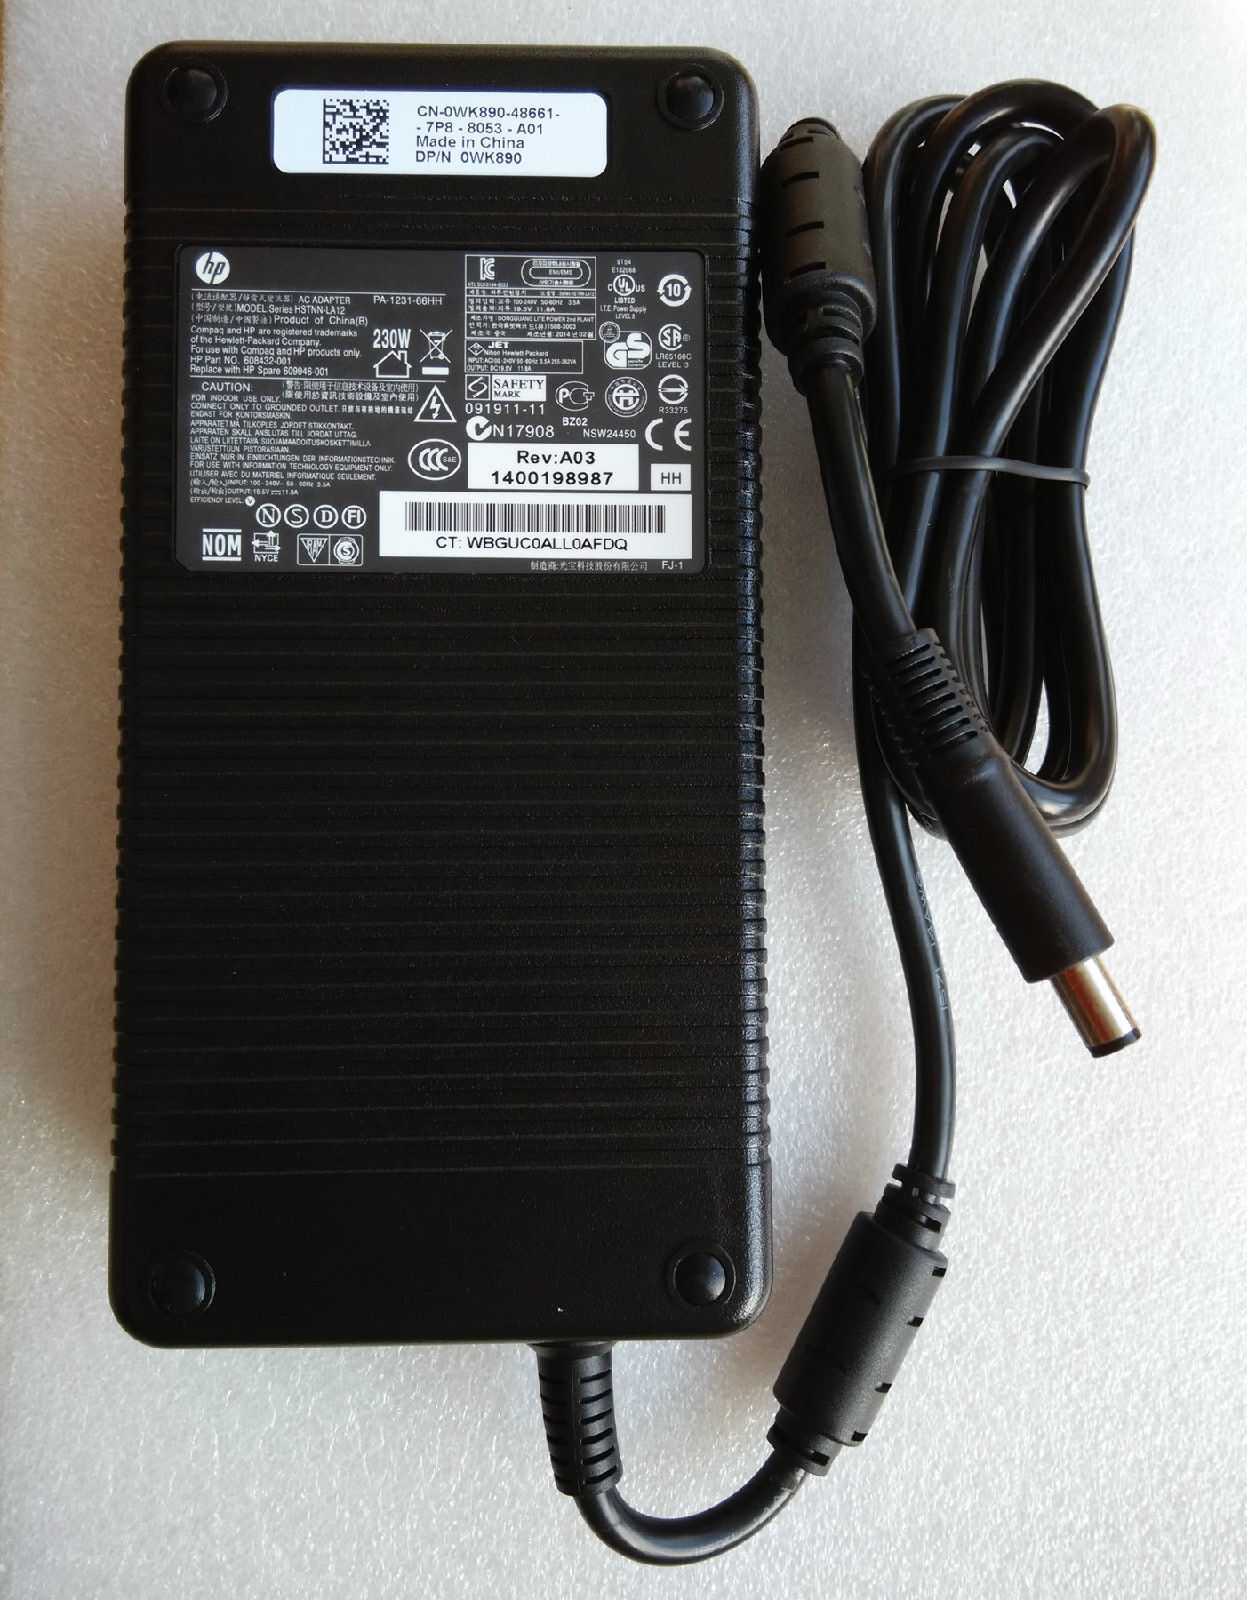 230W HP EliteBook 8770w 19.5V 11.8A AC Adapter Power Charger - Click Image to Close